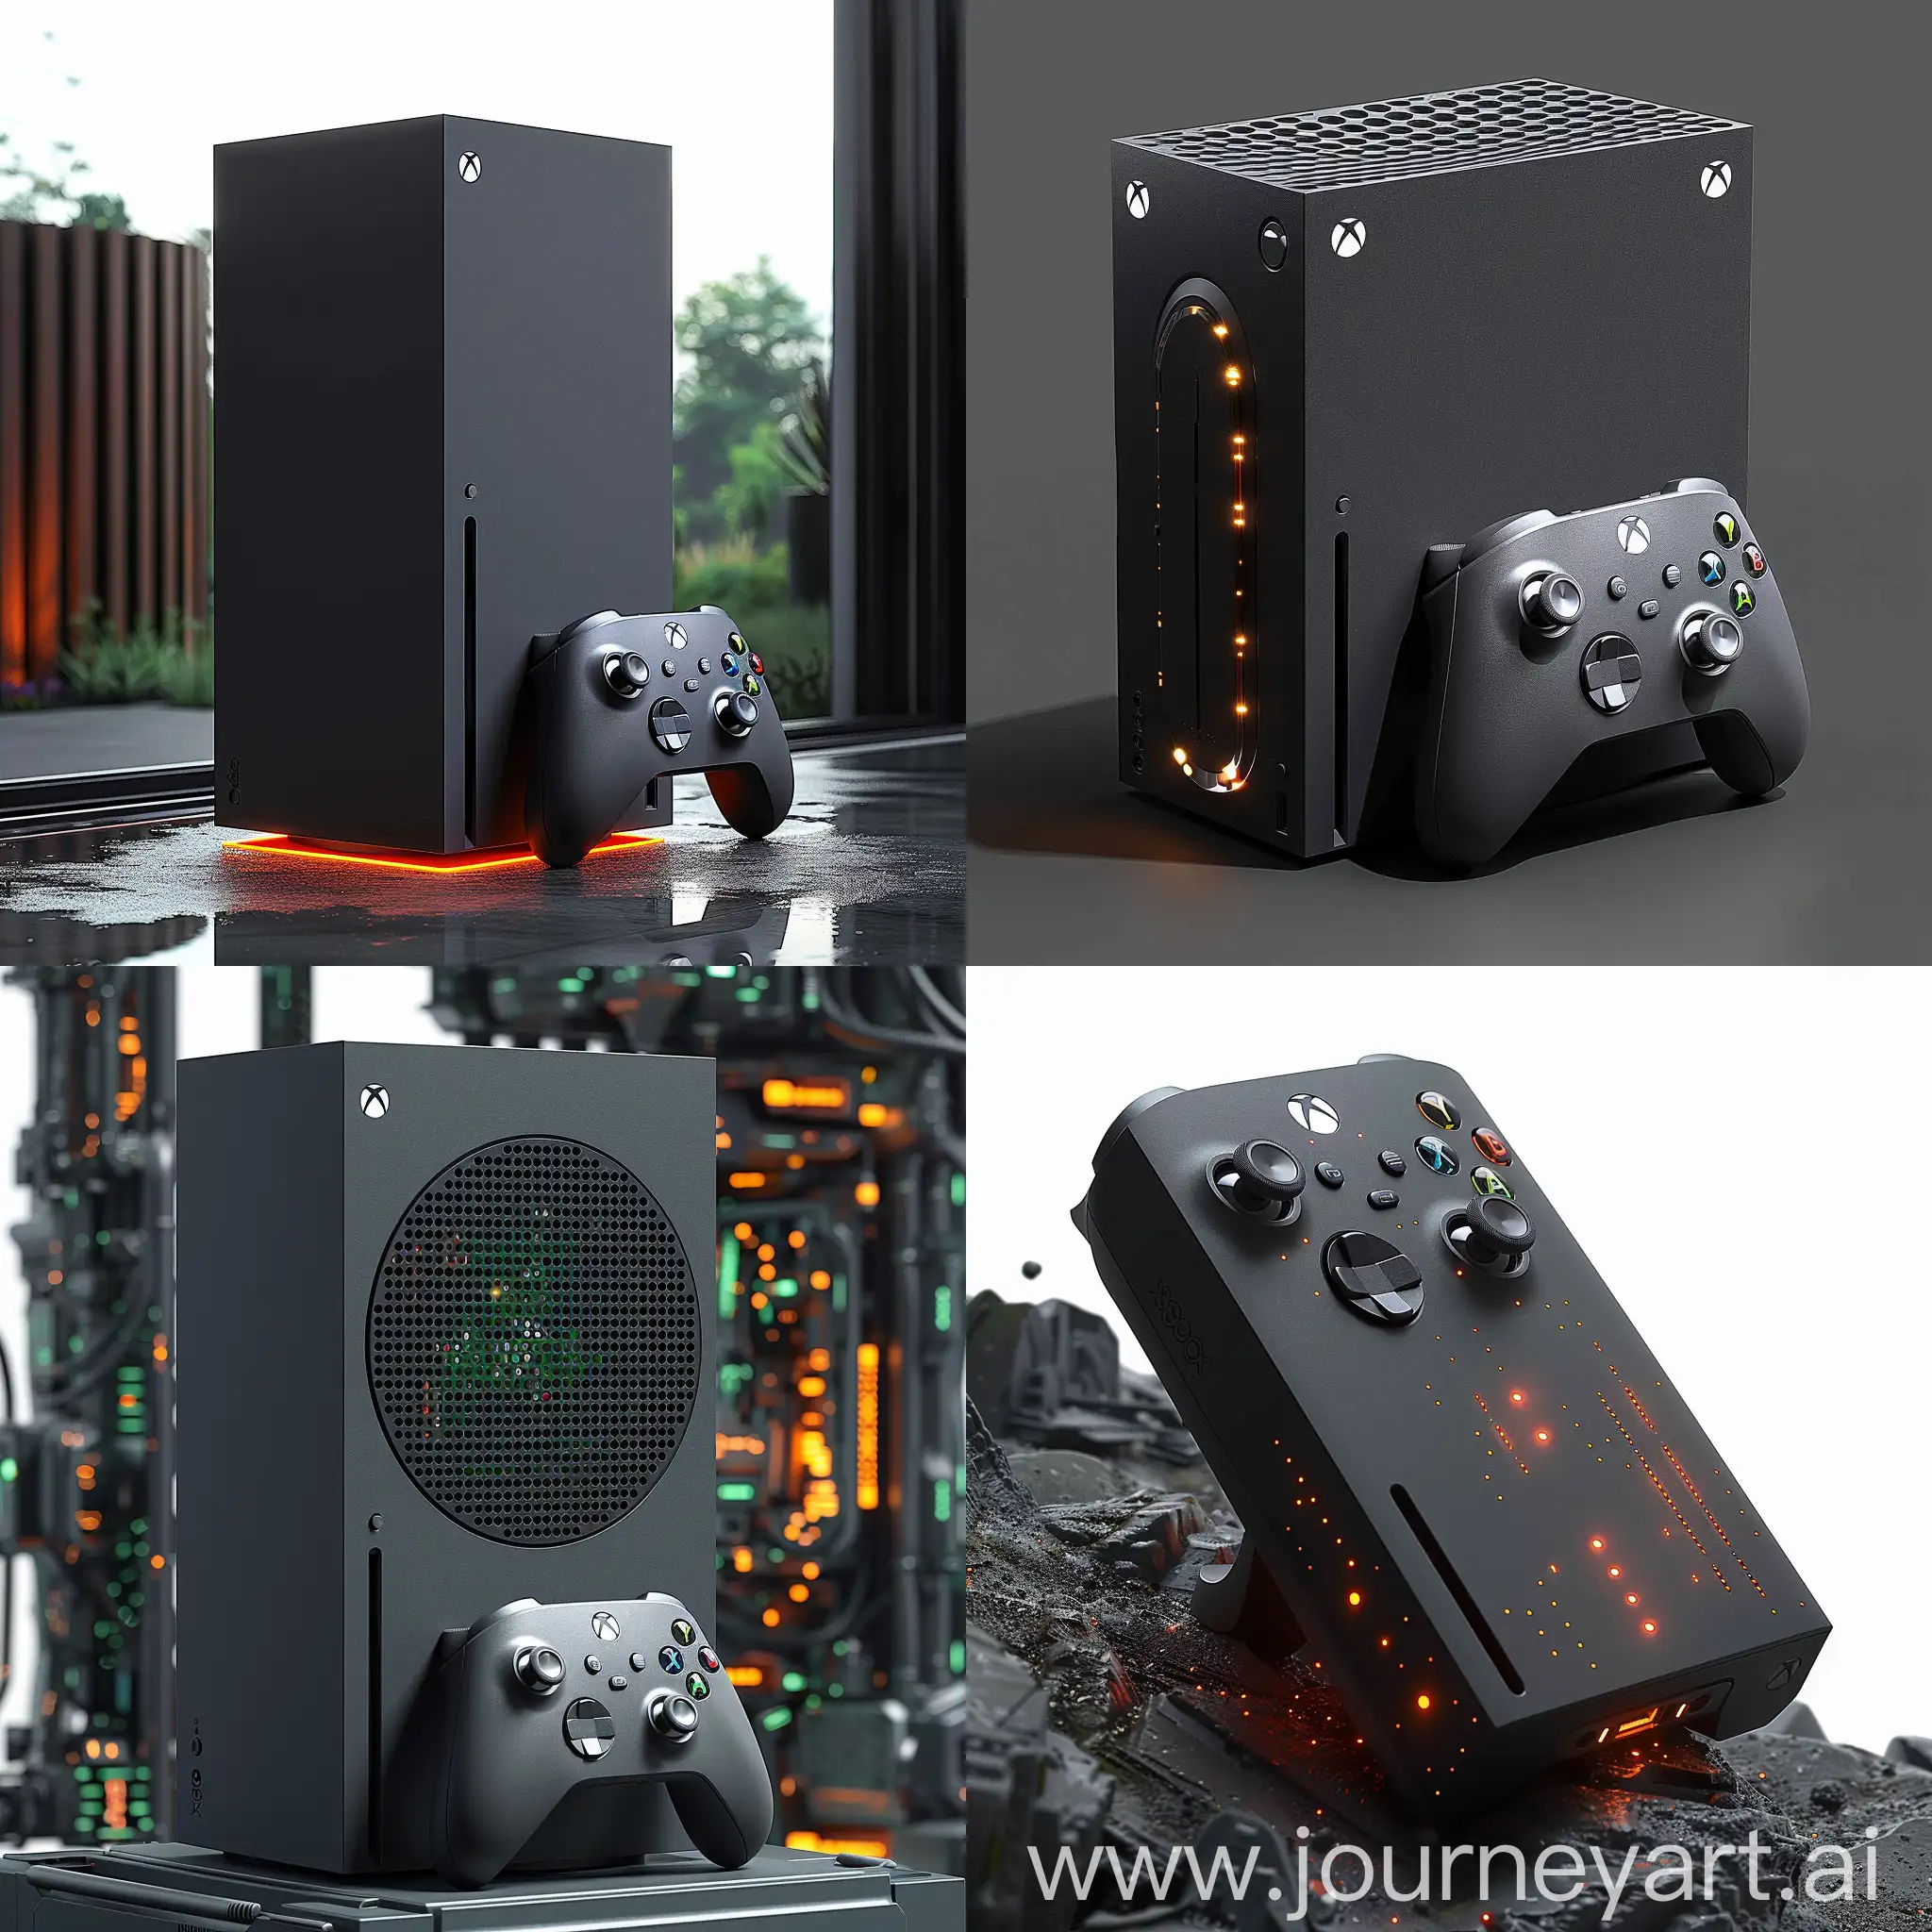 Futuristic Xbox Series X https://images-cdn.ubuy.co.in/650031d006906f37774b9024-2020-new-xbox-x-gaming-console.jpg:: sci-fi style, science fiction, 4K Gaming, Ray Tracing, Fast Loading Times, Backward Compatibility, Quick Resume, Variable Refresh Rate, Dolby Atmos and DTS:X Support, Smart Delivery, Xbox Game Pass, Customizable Storage Expansion, Quantum Enhanced Graphics, NeuroSync Immersion Engine, HyperDrive Load Times, Nanotech Adaptive AI, HoloLens Companion Integration, Plasma Shield Deflector, ChronoSync Time Warp, Quantum Entanglement Multiplayer, Vortex Soundwave Amplification, Cybernetic Neural Interface, octane render --stylize 1000